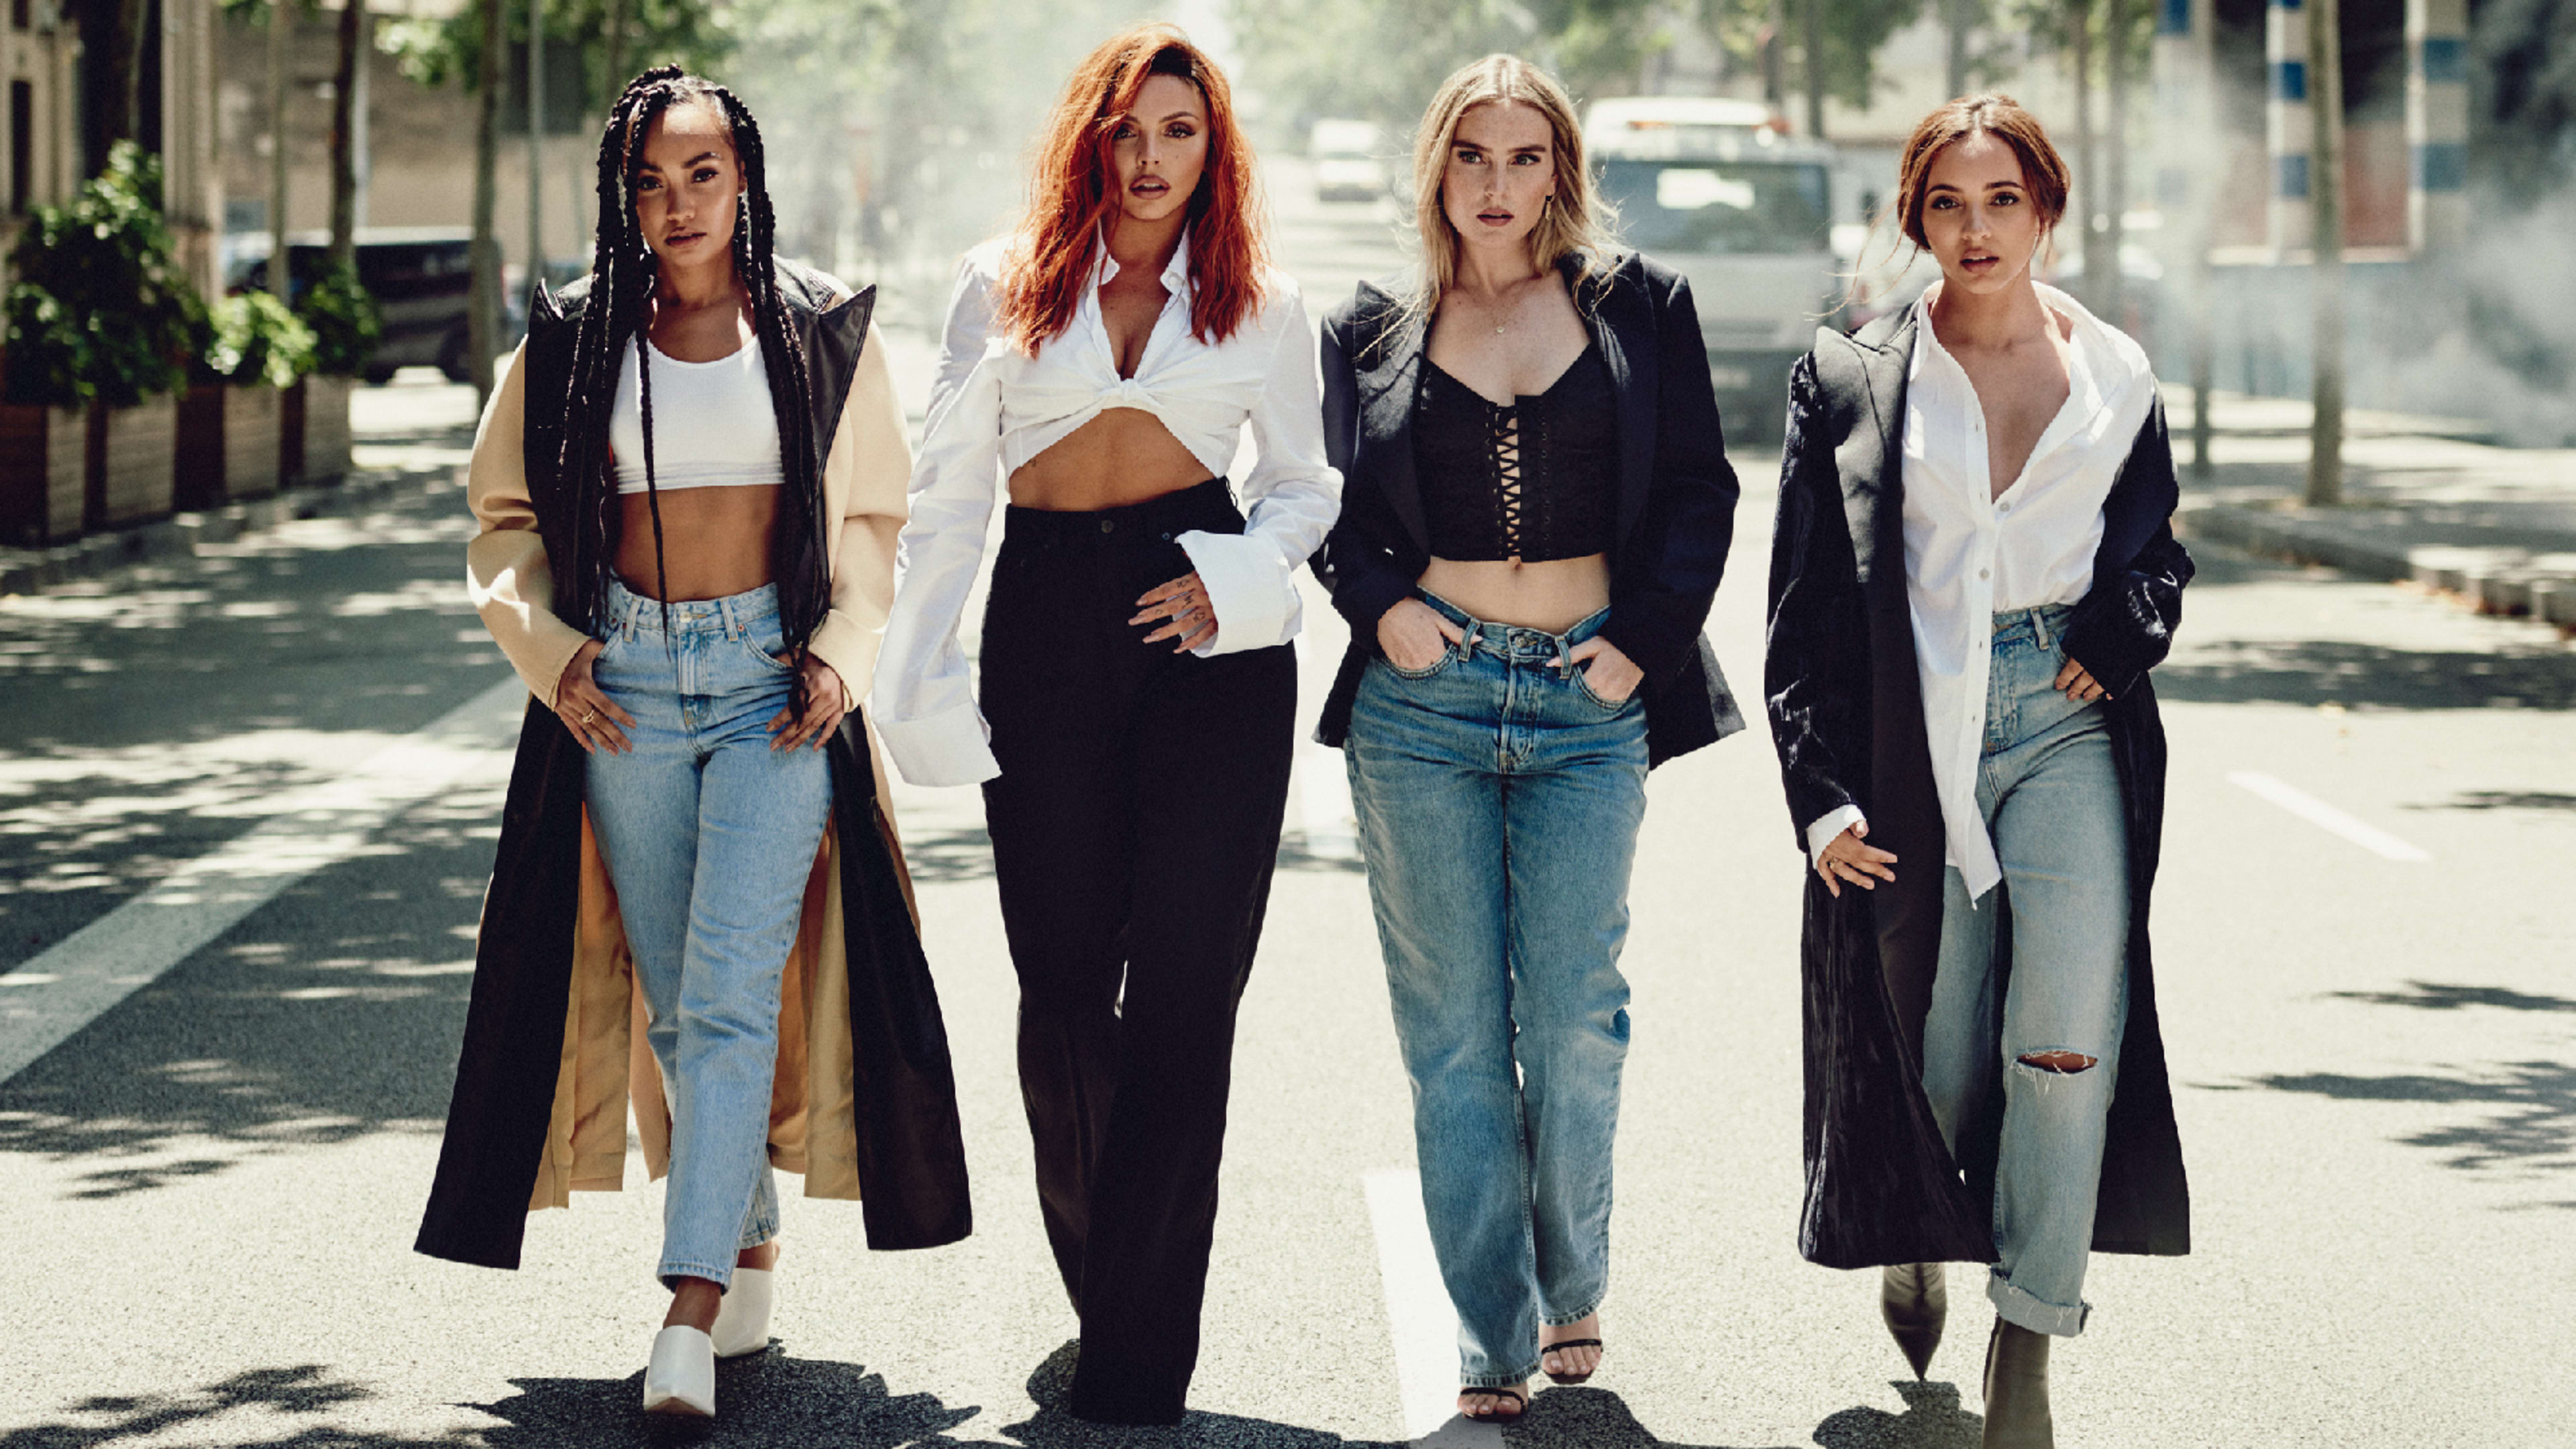 Exclusive: Little Mix is powering Sony Music’s most ambitious Alexa skill to date